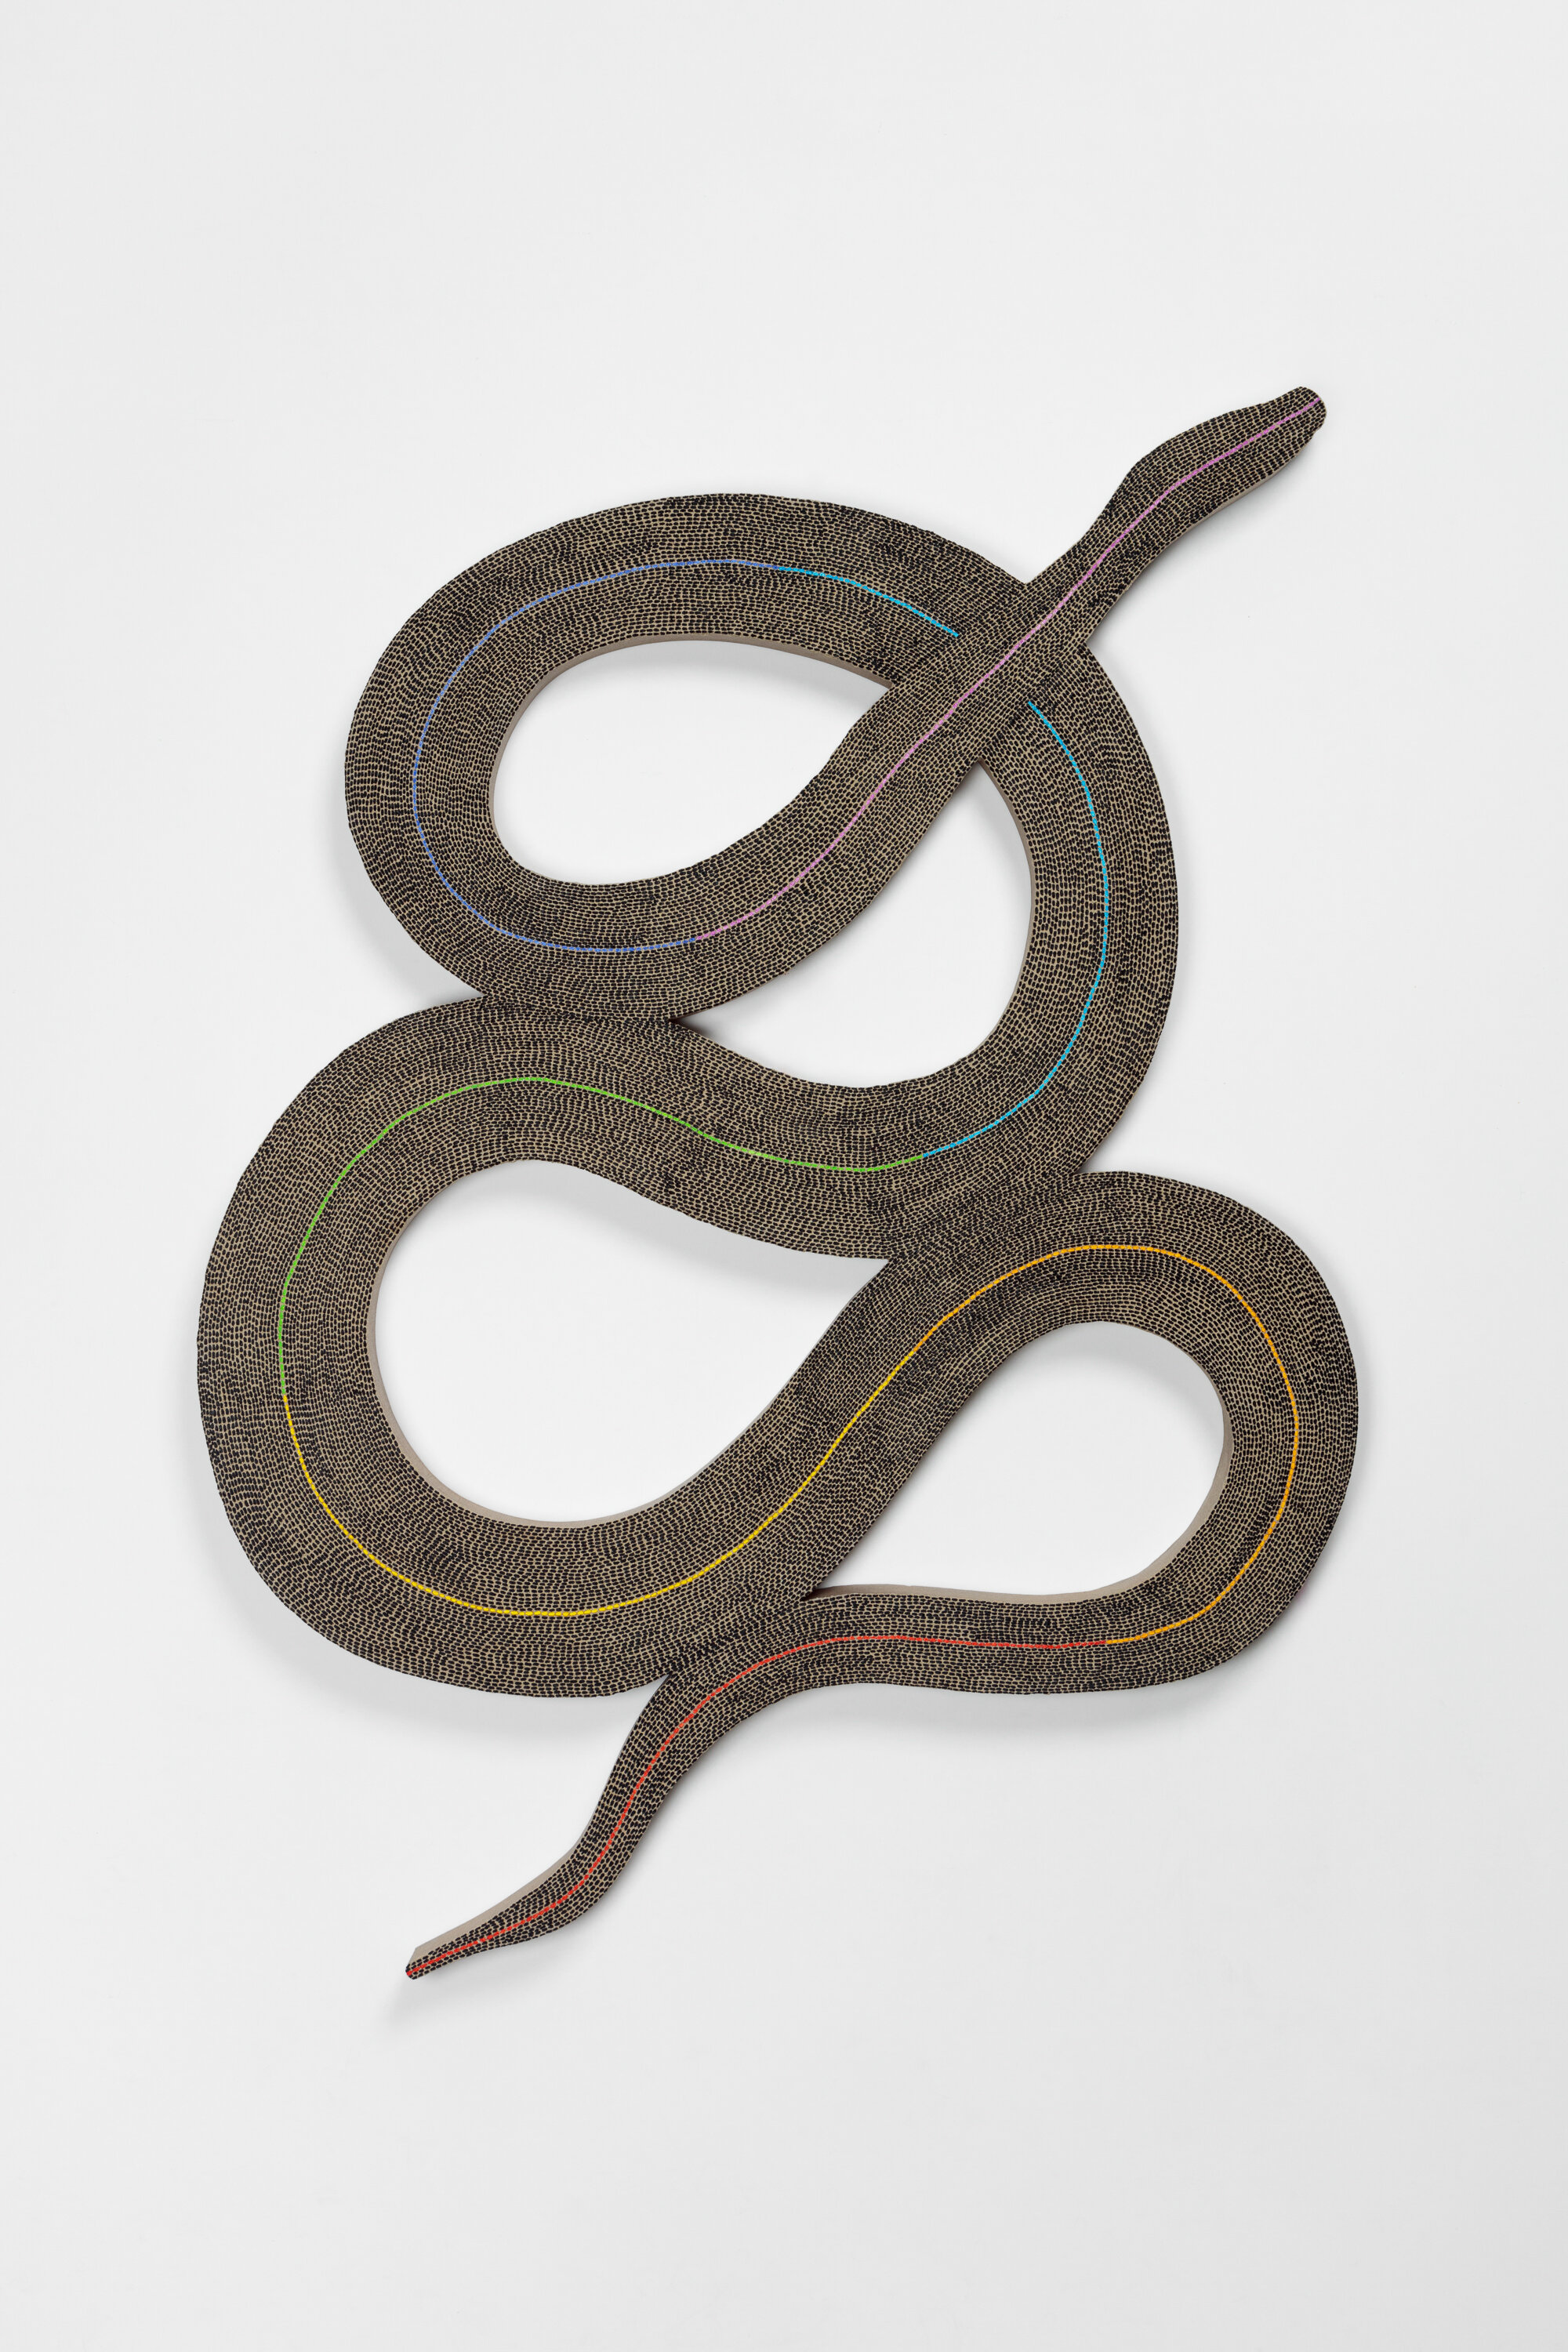   Mind, Body, Spirit Chakra Snake , 2019  Sand, acrylic and oil on linen  66 x 49 inches  